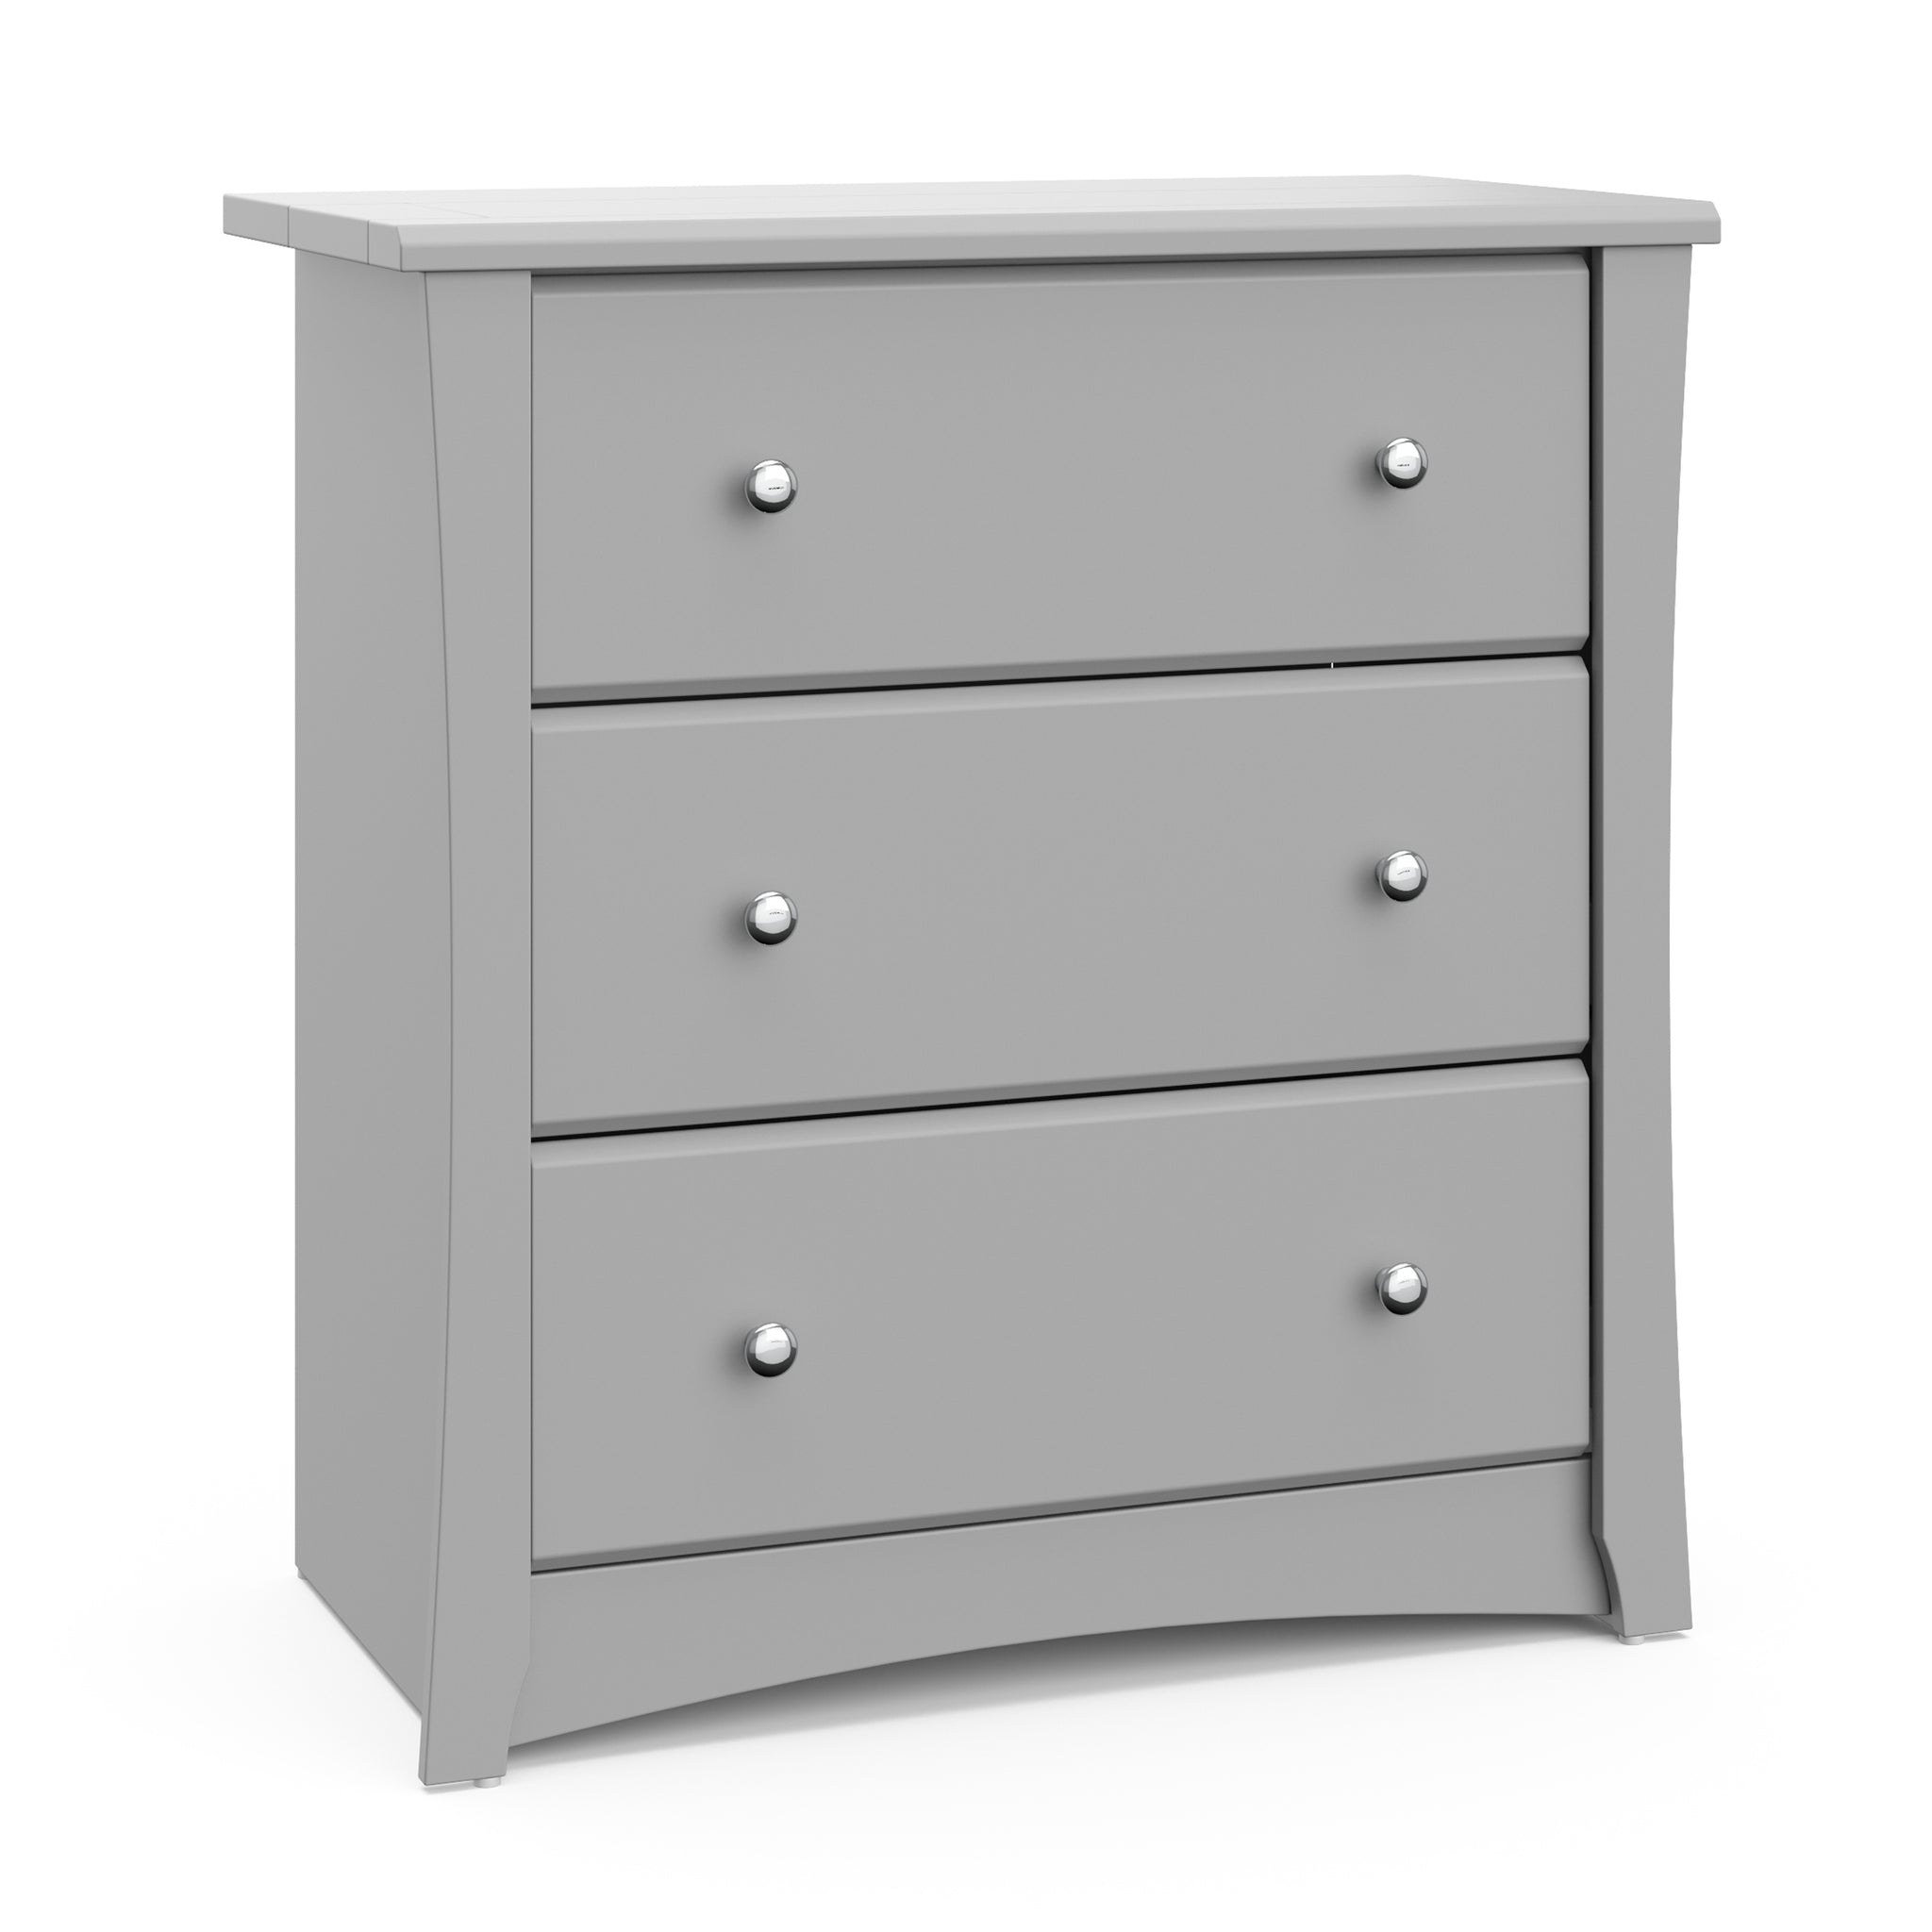 Pebble gray 3 drawer chest angled